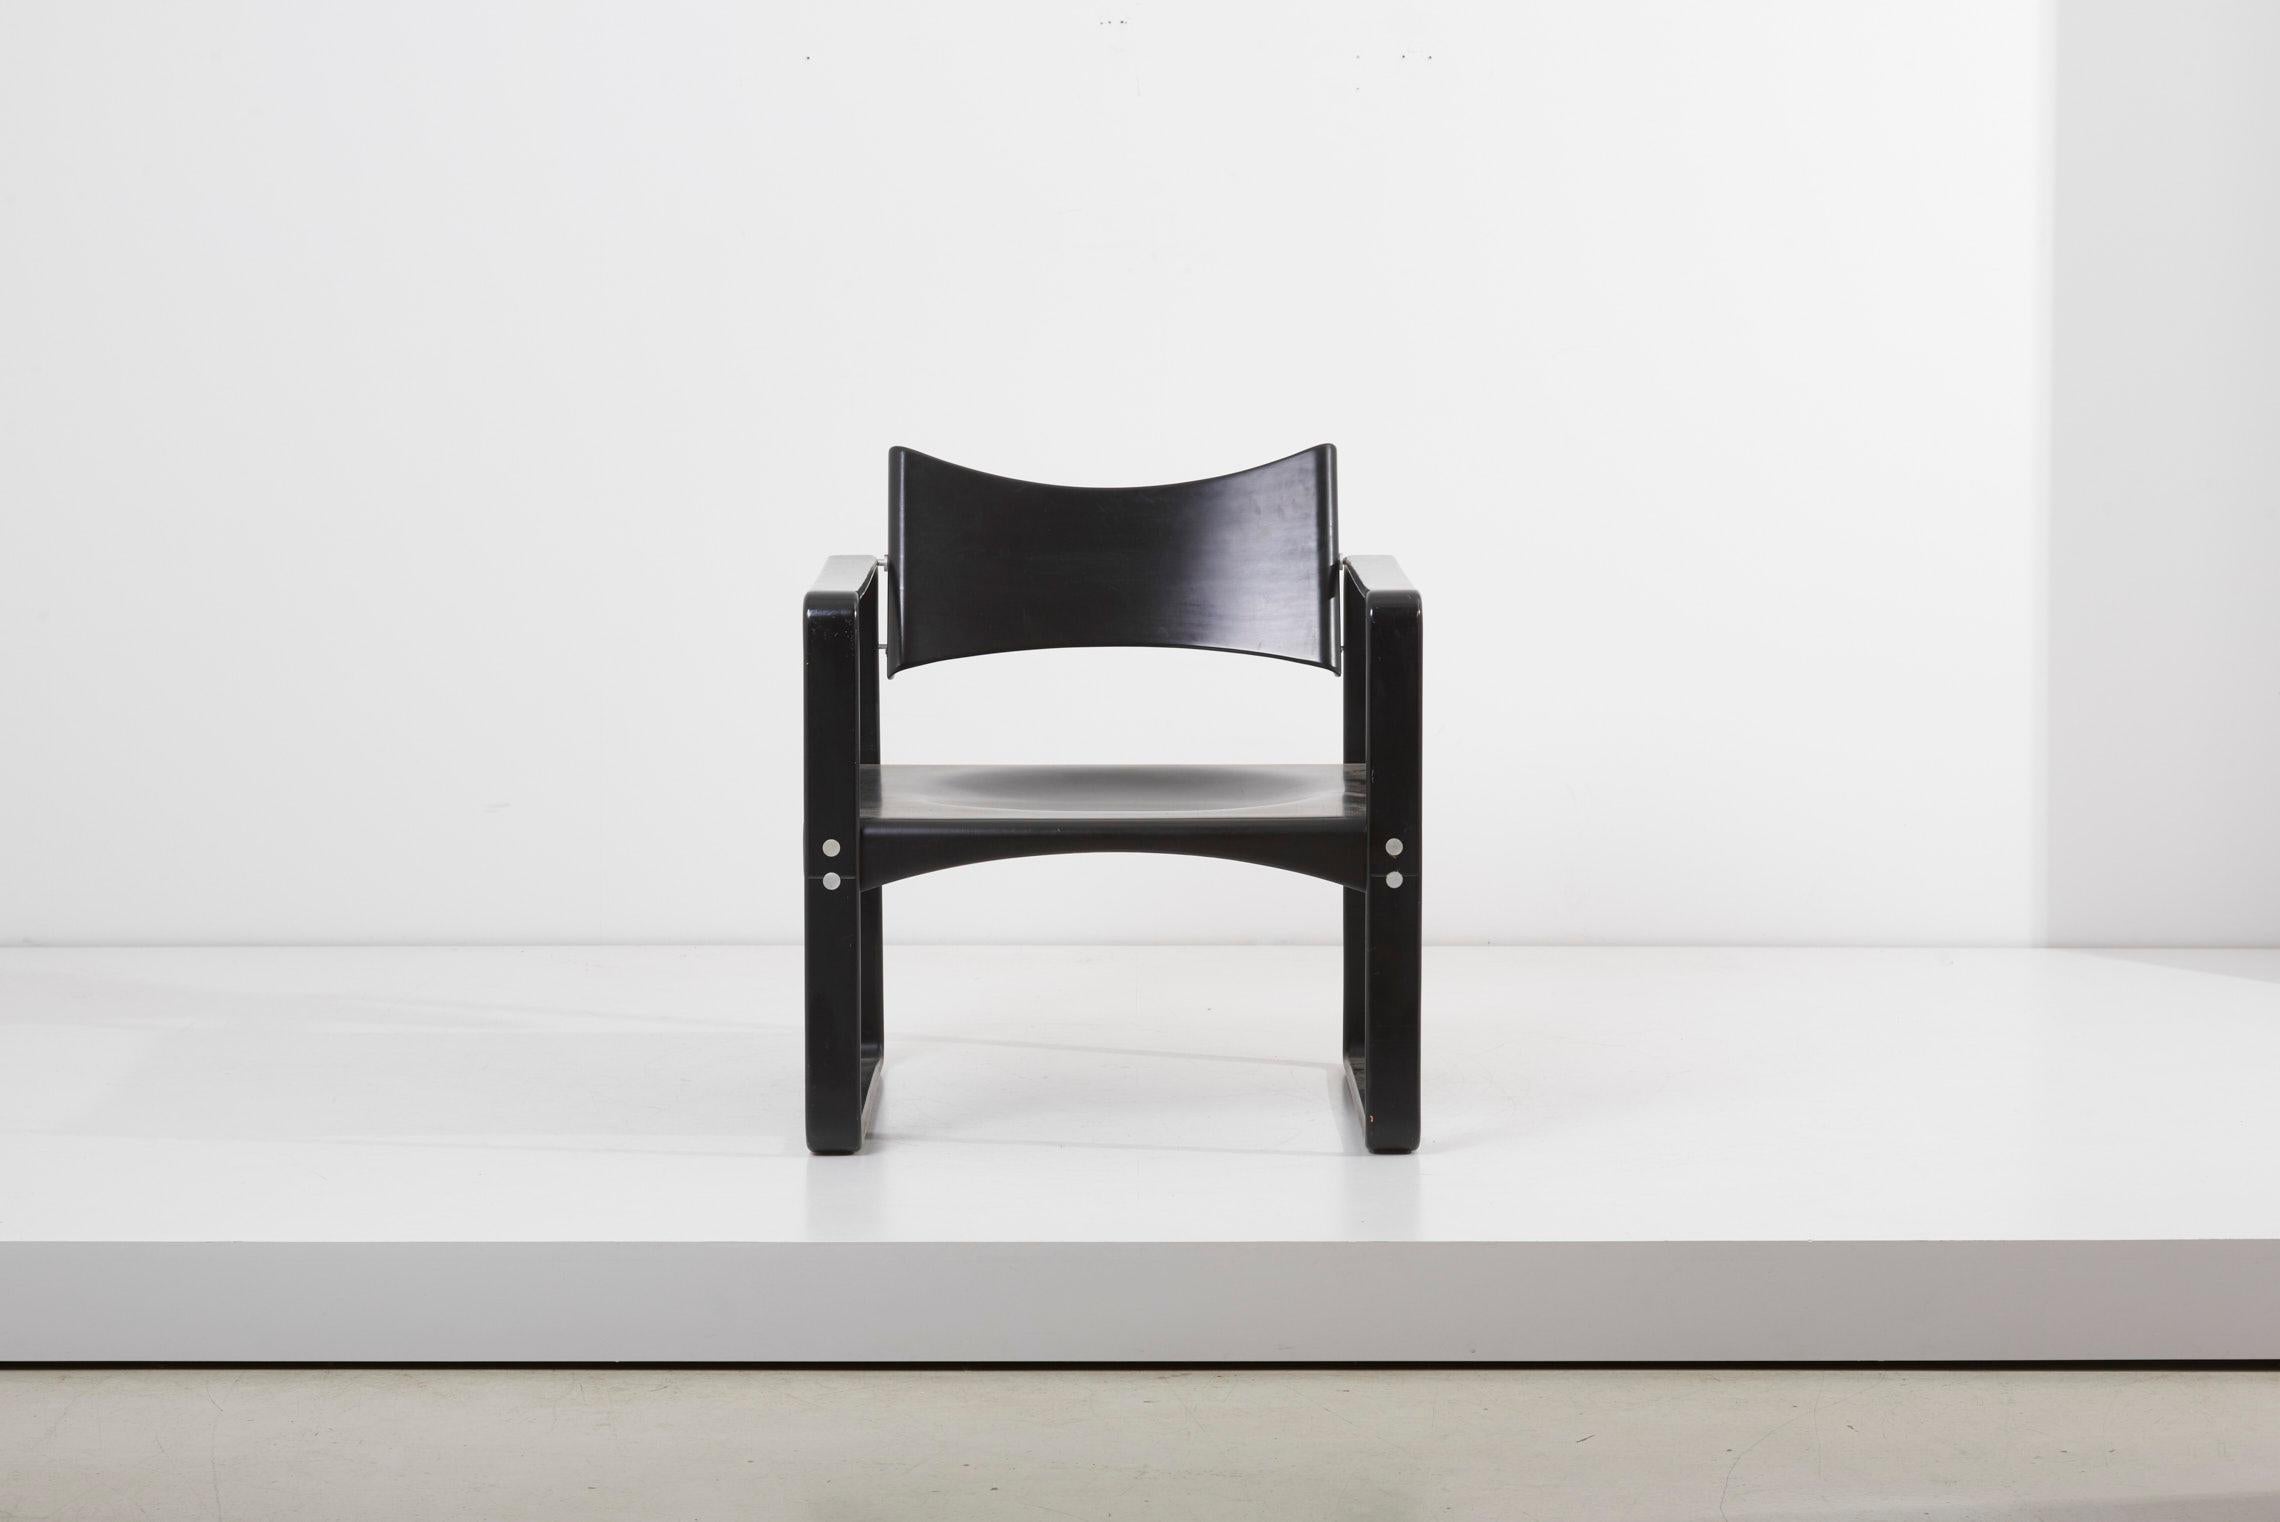 Armchair model no. 271F, designed 1965 by Verner Panton and manufactured by Thonet in Germany.
Made of black lacquered wood and labeled.